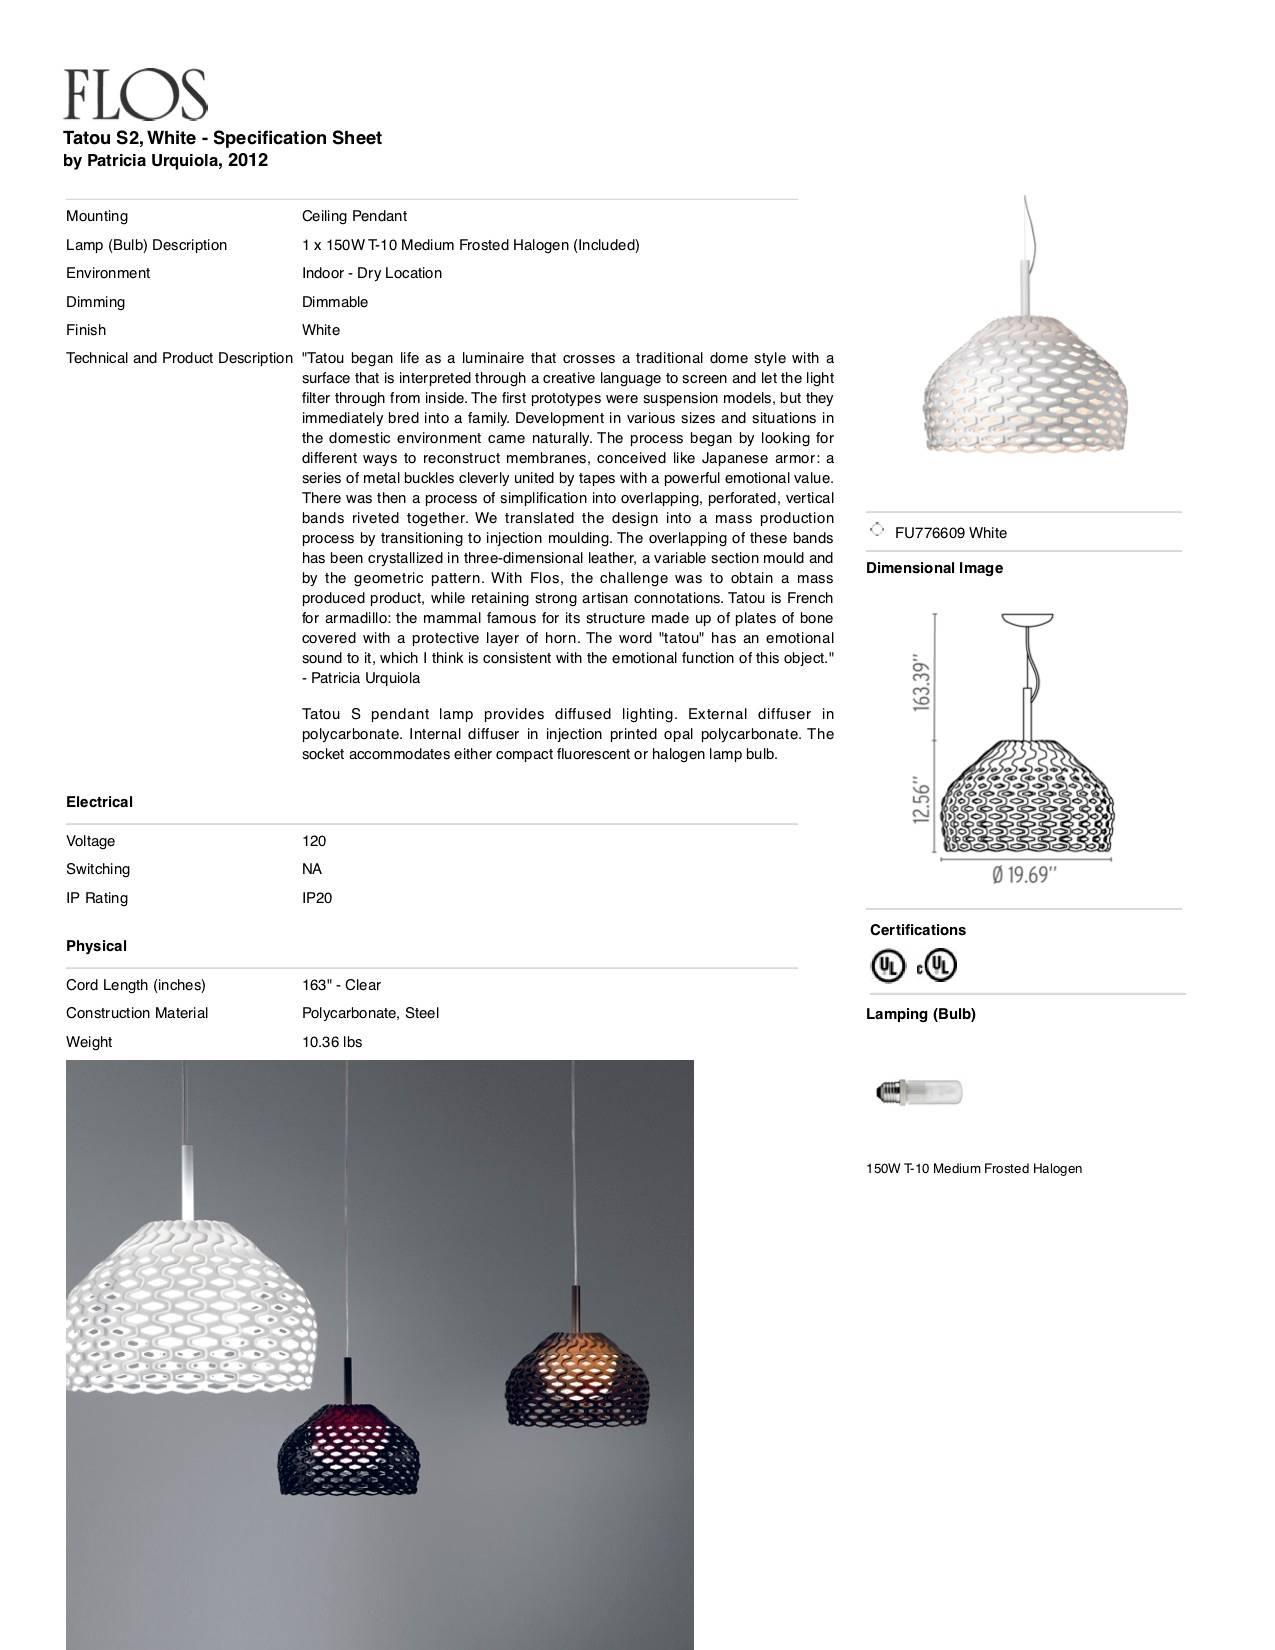 FLOS Tatou S2 Pendant Light in White by Patricia Urquiola In New Condition For Sale In Brooklyn, NY